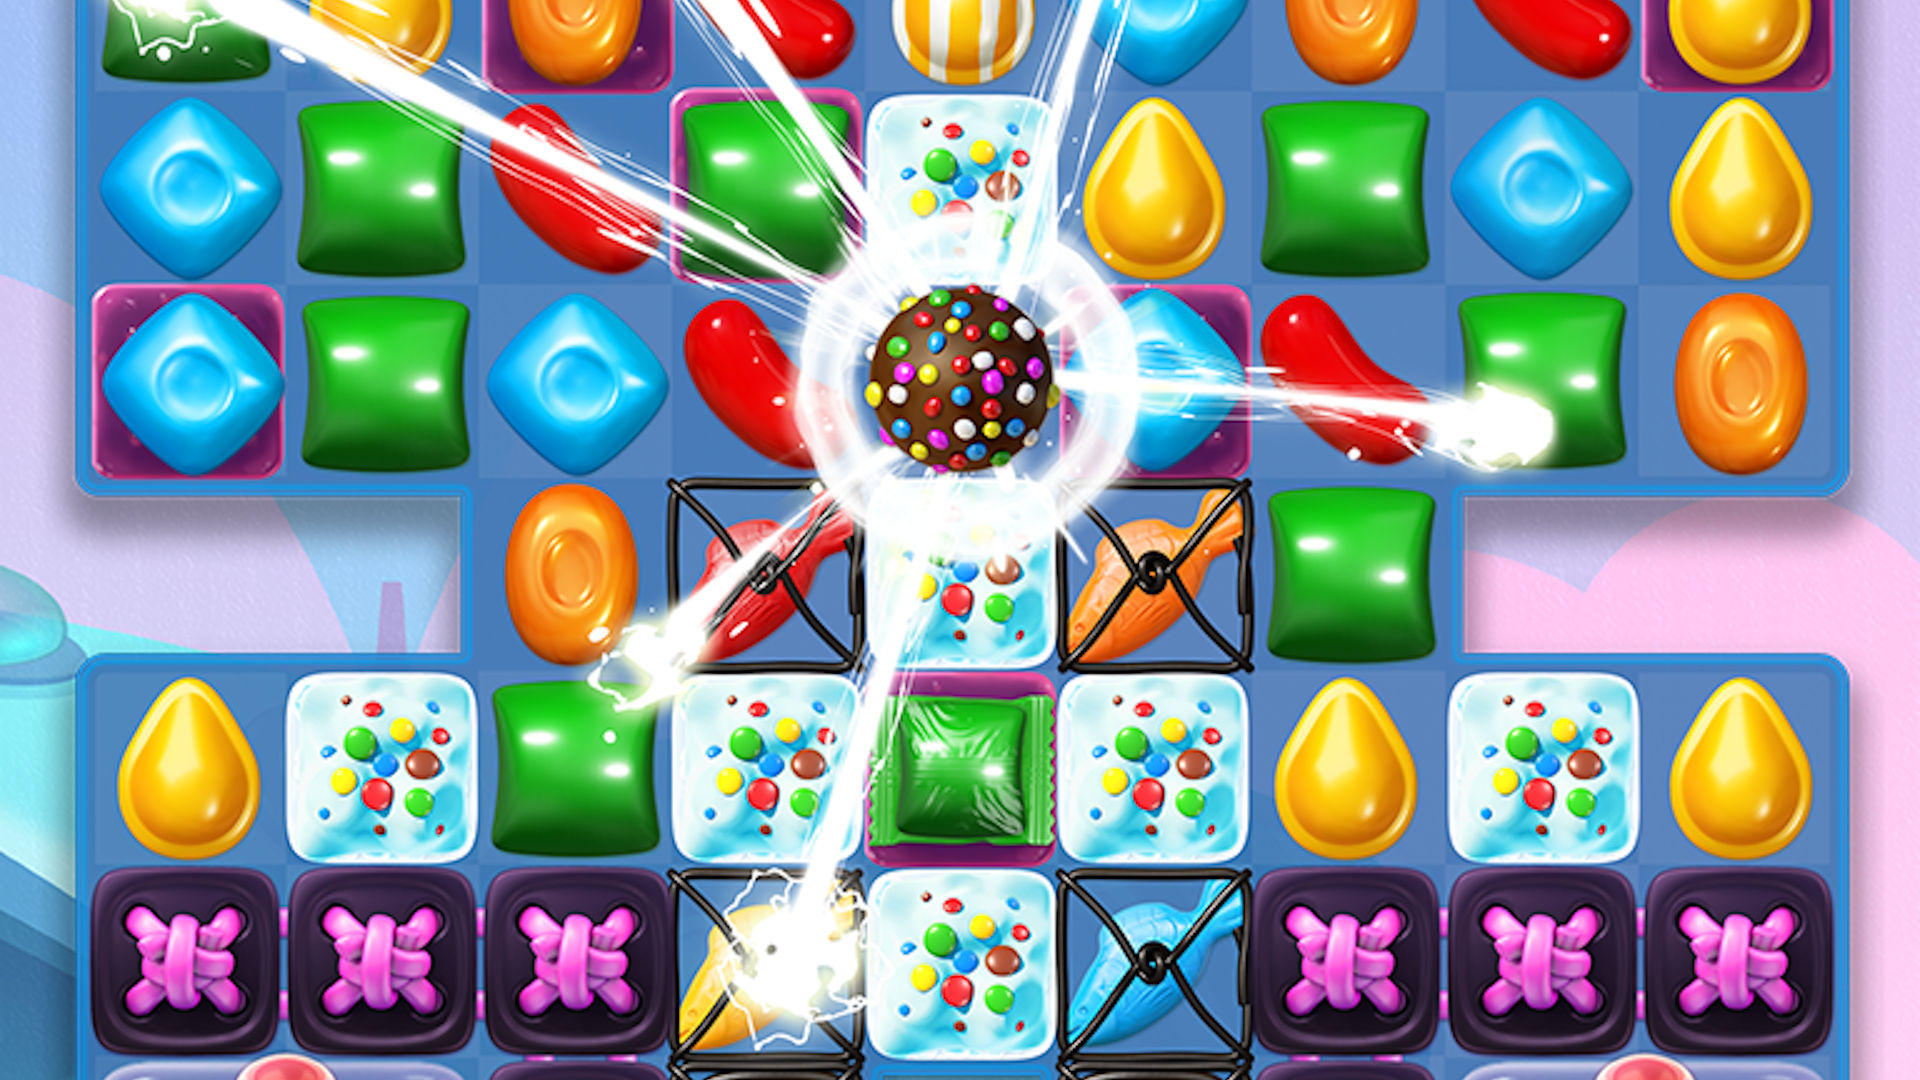 The best Candy Crush games | Pocket Tactics